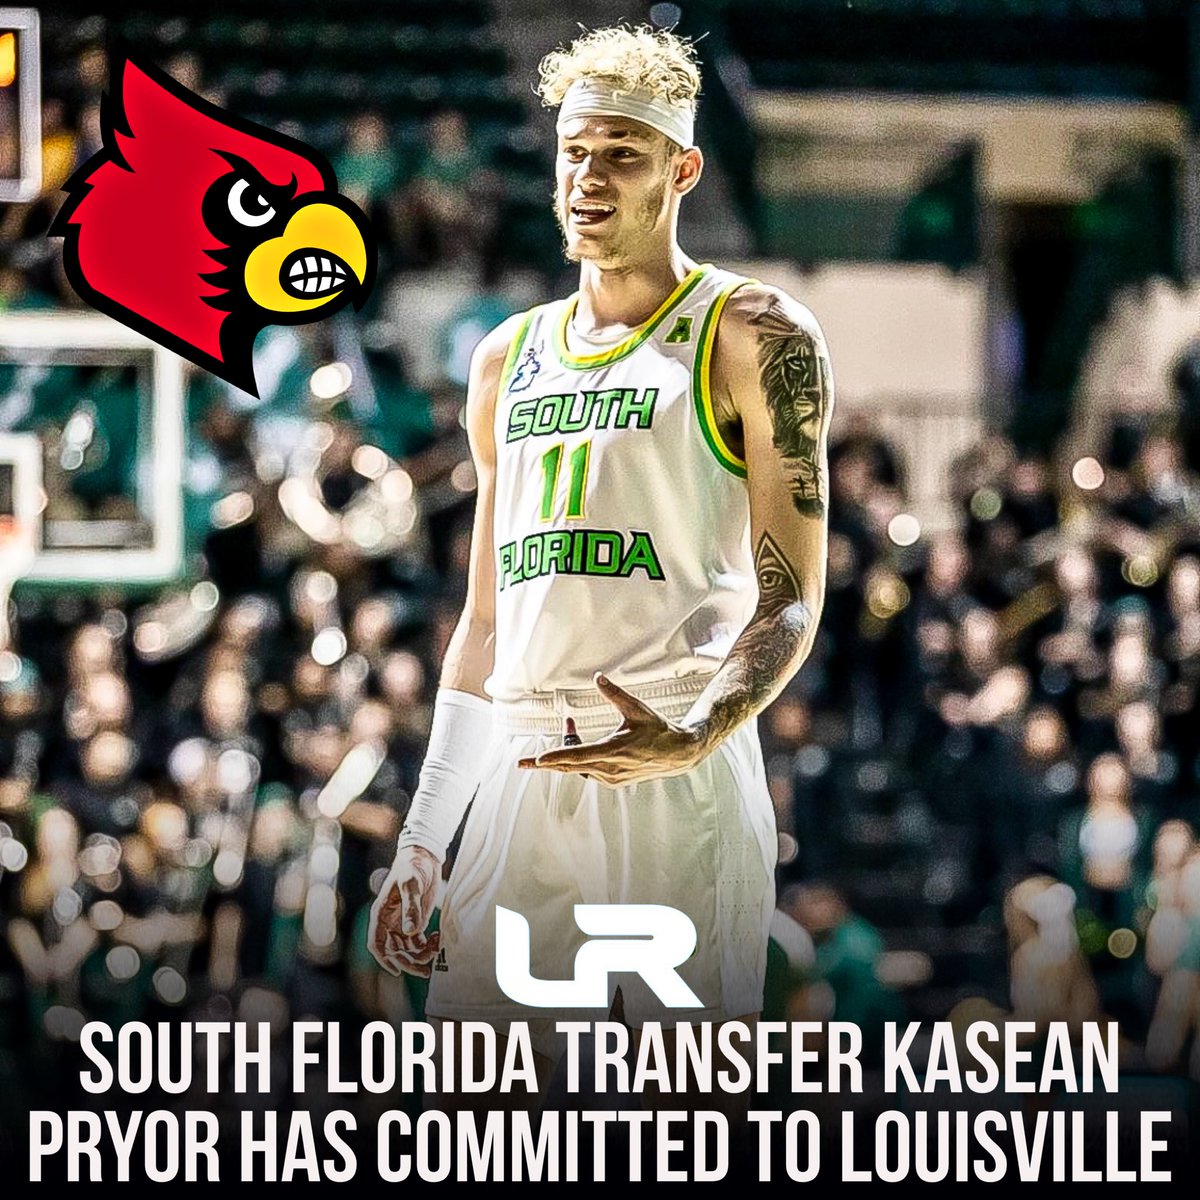 NEWS: South Florida transfer Kasean Pryor just announced he’s committed to Louisville and Pat Kelsey. Pryor is a native of Chicago, Illinois who began his career playing two seasons at Boise State before playing one at USF. He averaged 13.0PPG, 7.9RPG, 1.8APG and 1.2SPG this